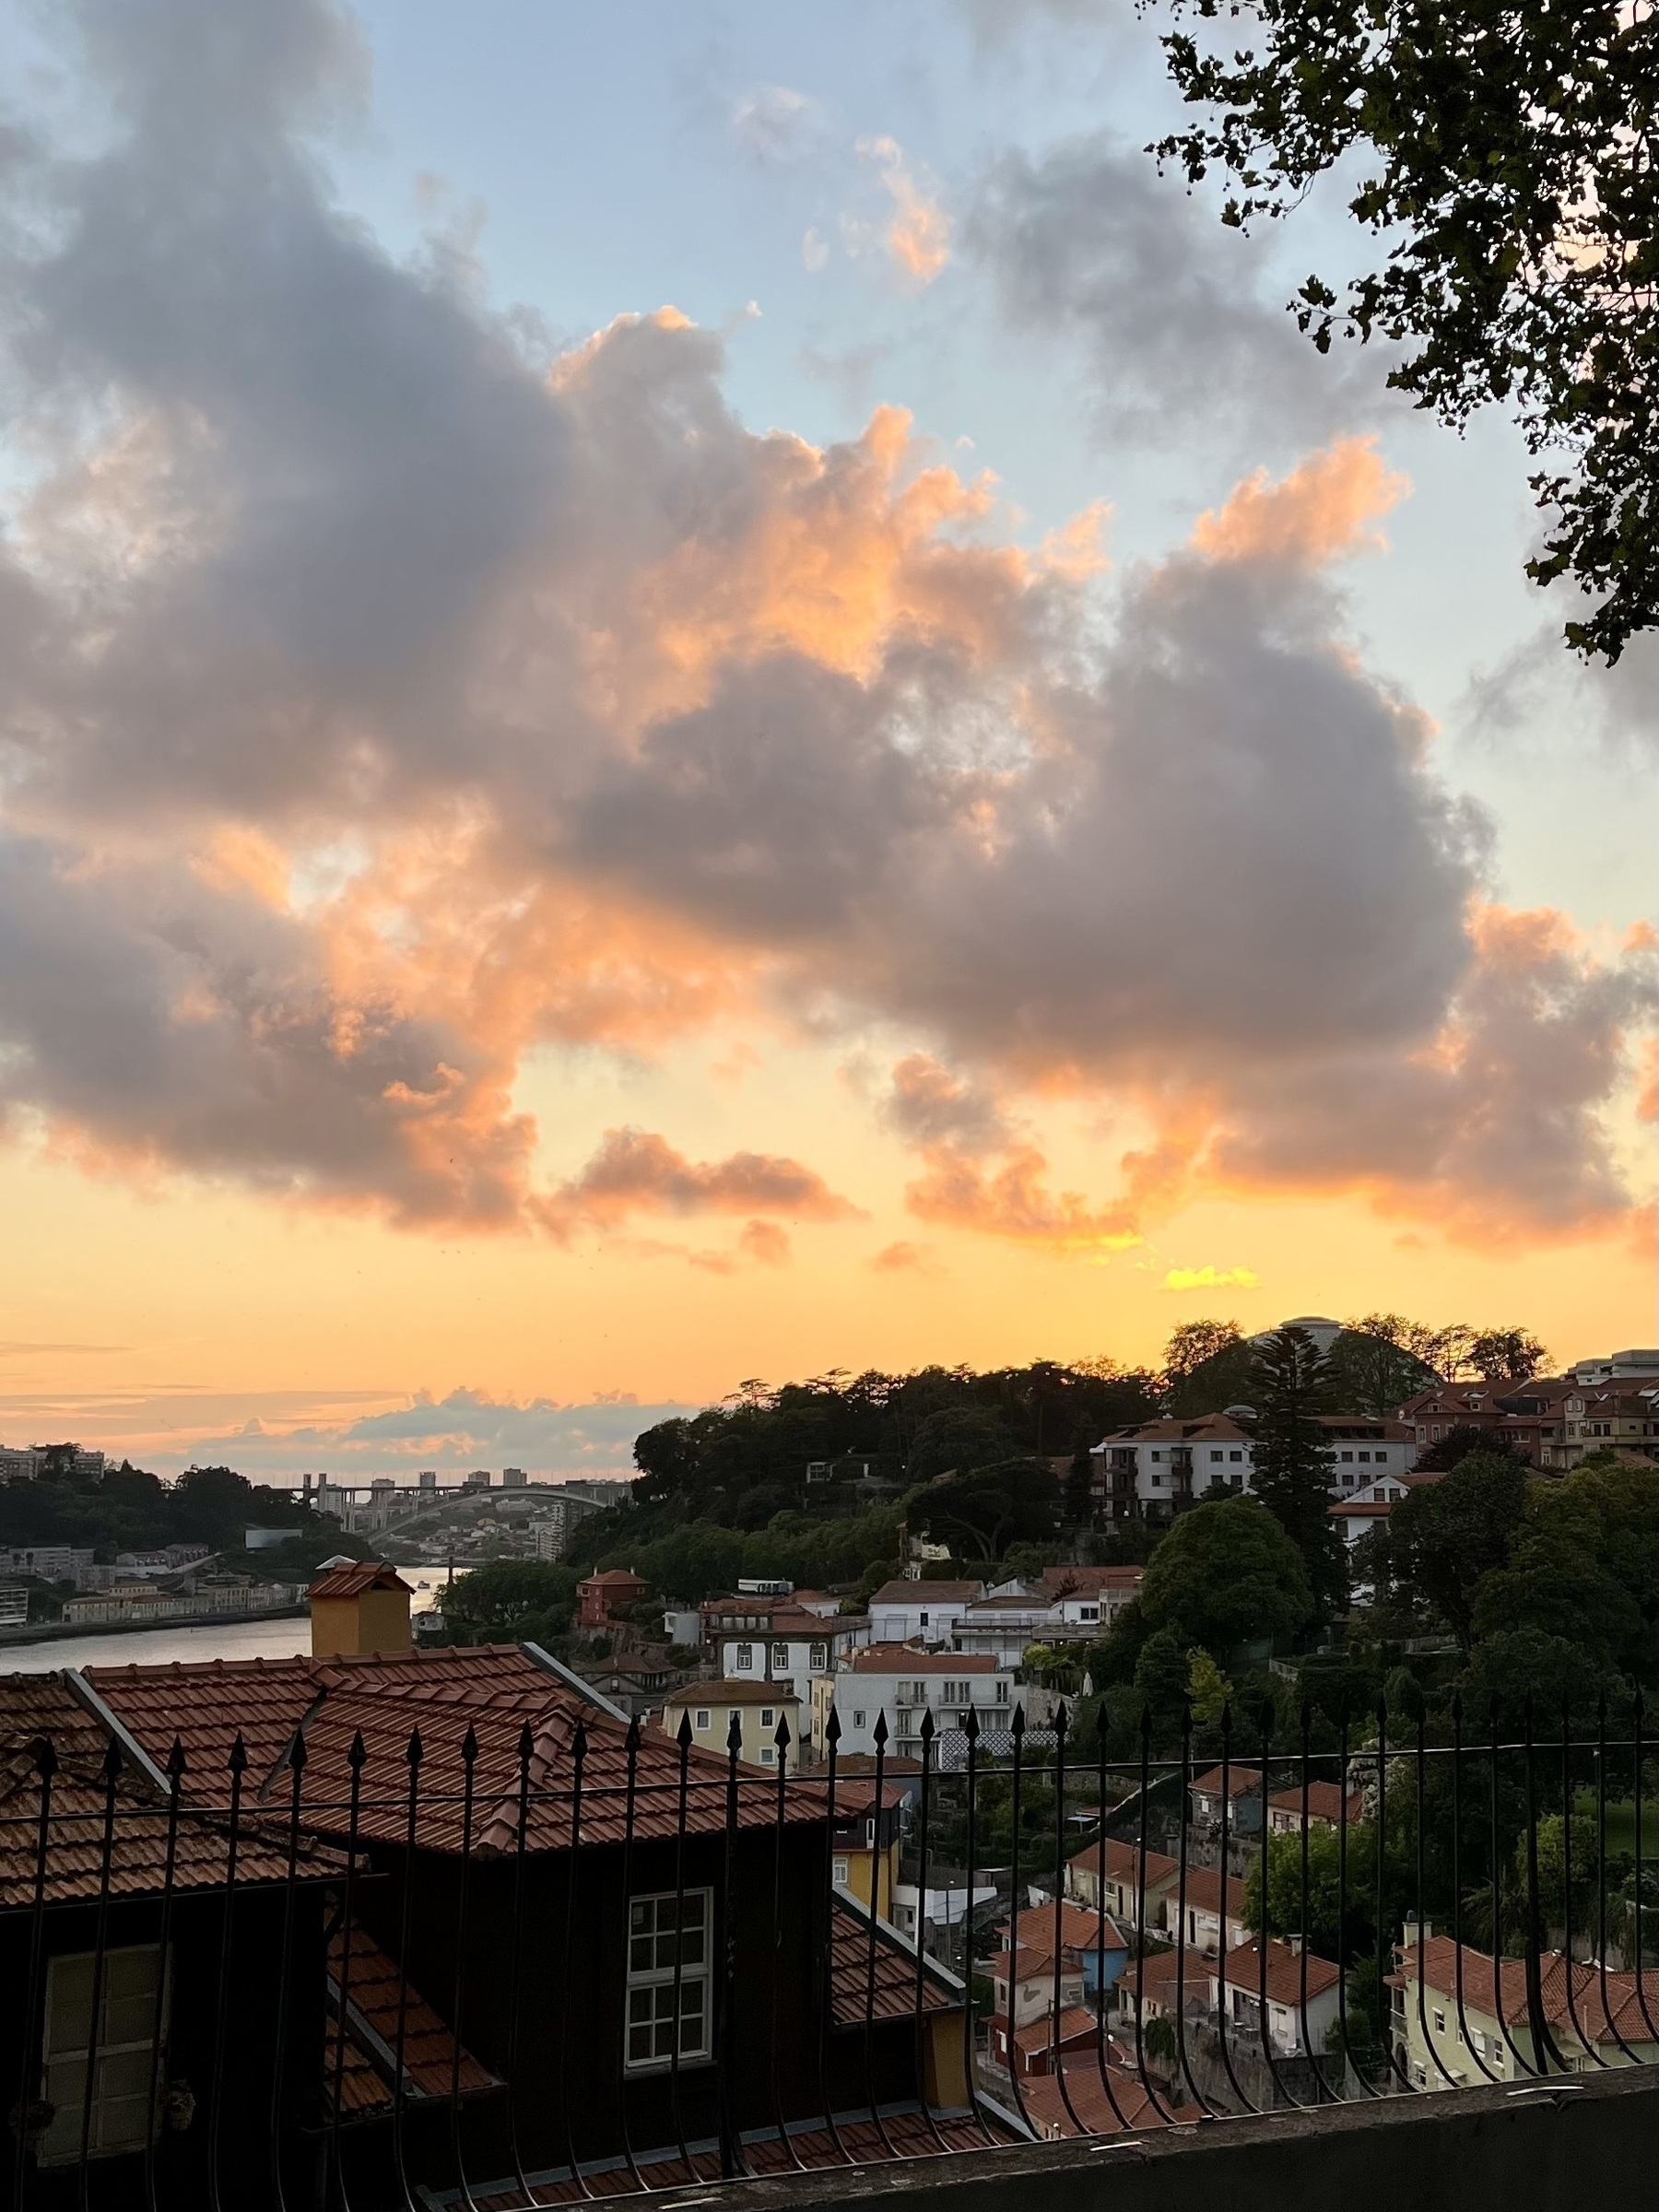 Sunset clouds glow orange above a hillside town with houses and a river in the distance, framed by dark metal railings and tree leaves.